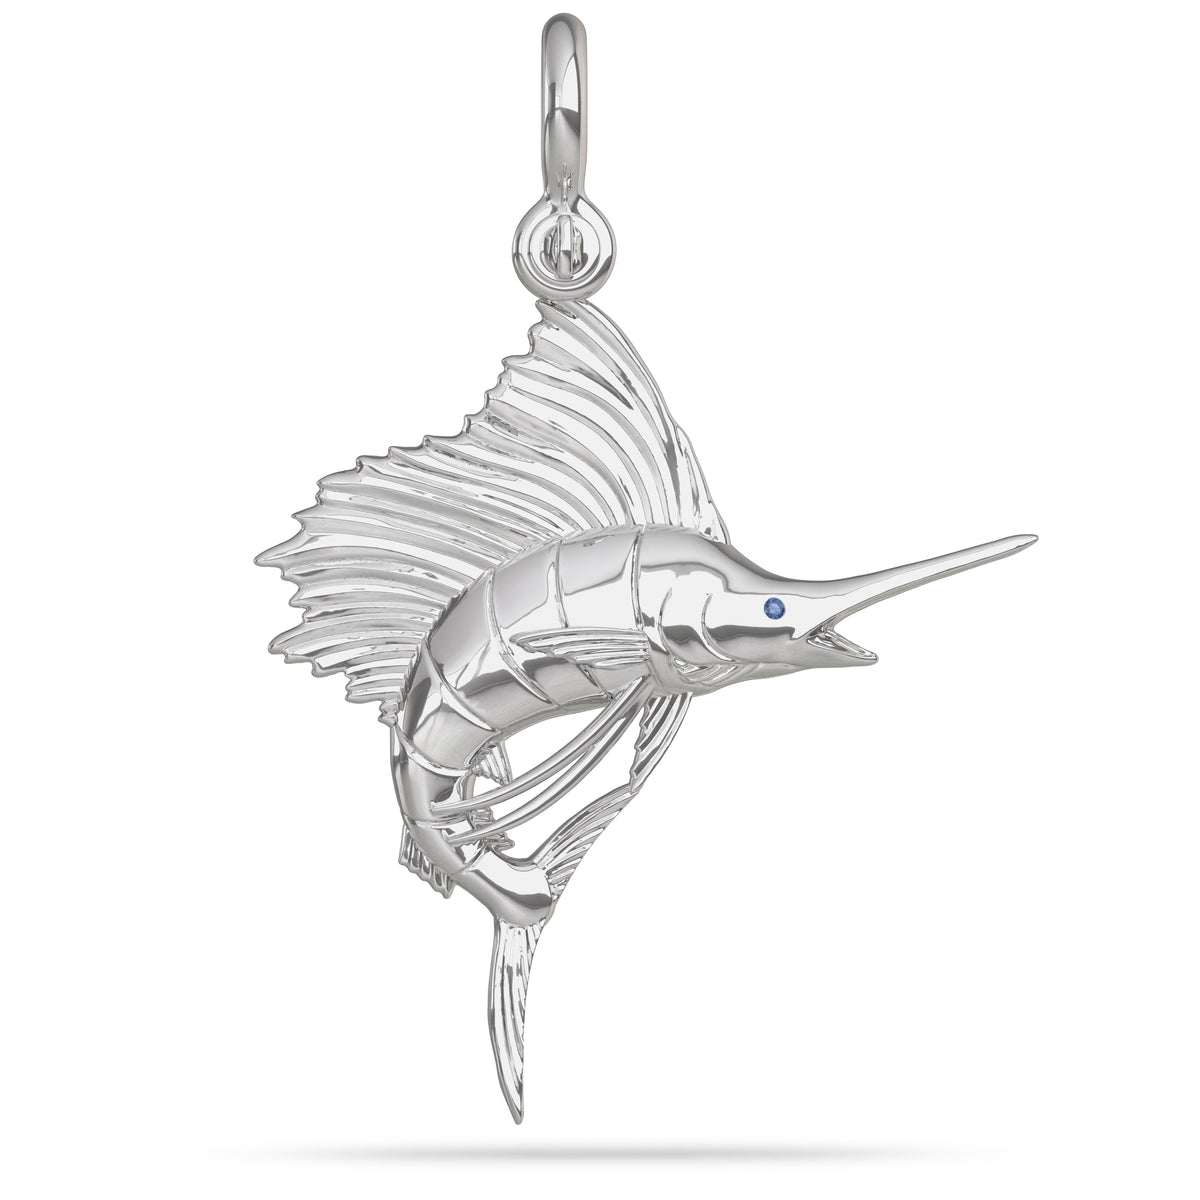 Sterling Silver Sailfish Fish Pendant High Polished Mirror Finish With Blue Sapphire Eye with A Mariner Shackle Bail Custom Designed By Nautical Treasure Jewelry In The Florida Keys Billfish Foundation